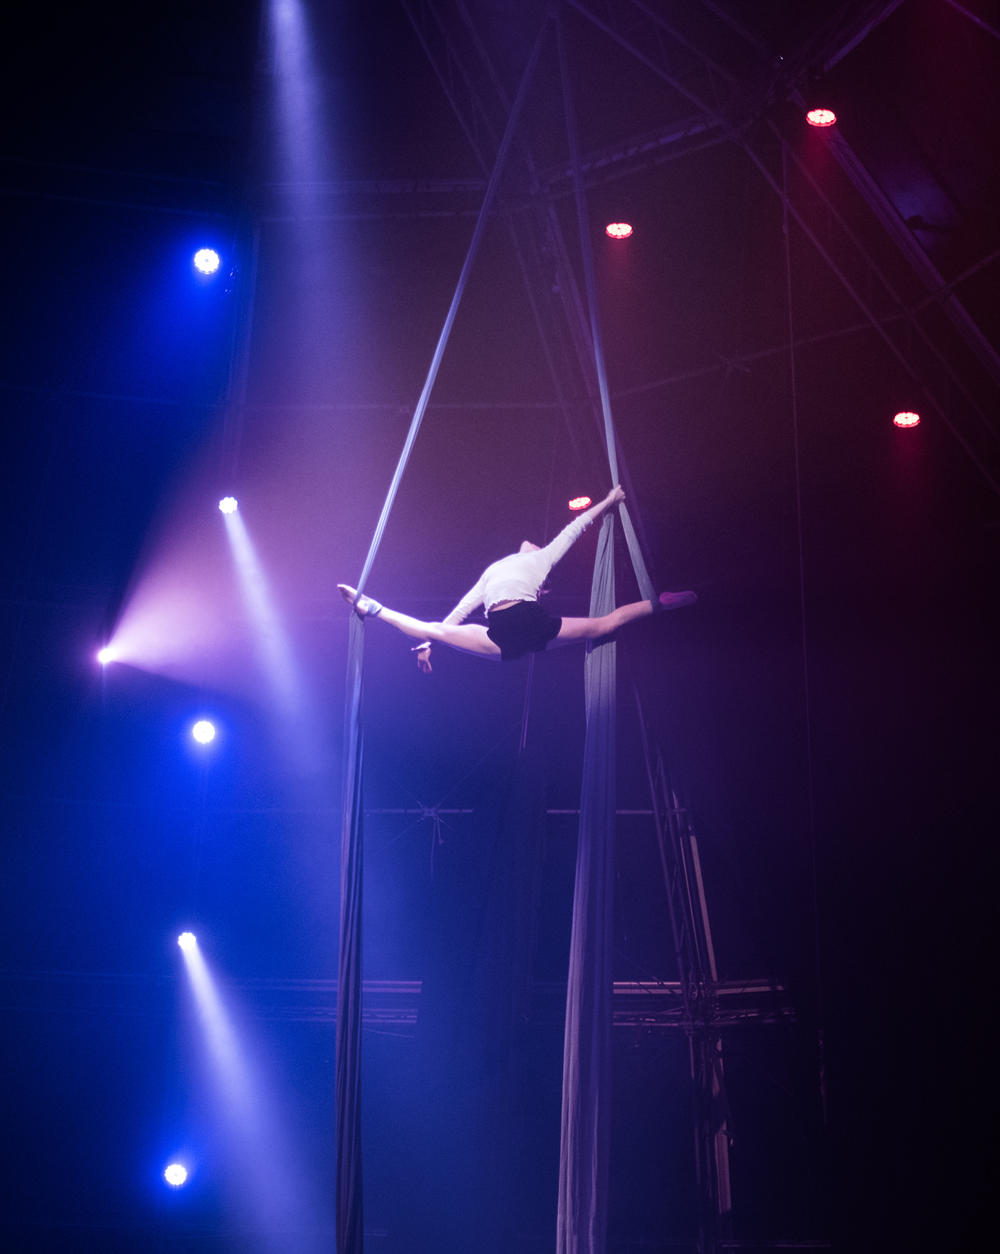 Sabine Van Rensburg, the daughter of Zip Zap's founder, Brent Van Rensburg, performs aerial silk acrobatics act during a show in Cape Town, South Africa. She now tours with the Canada-based Seven Fingers circus but returned as a visiting performer.